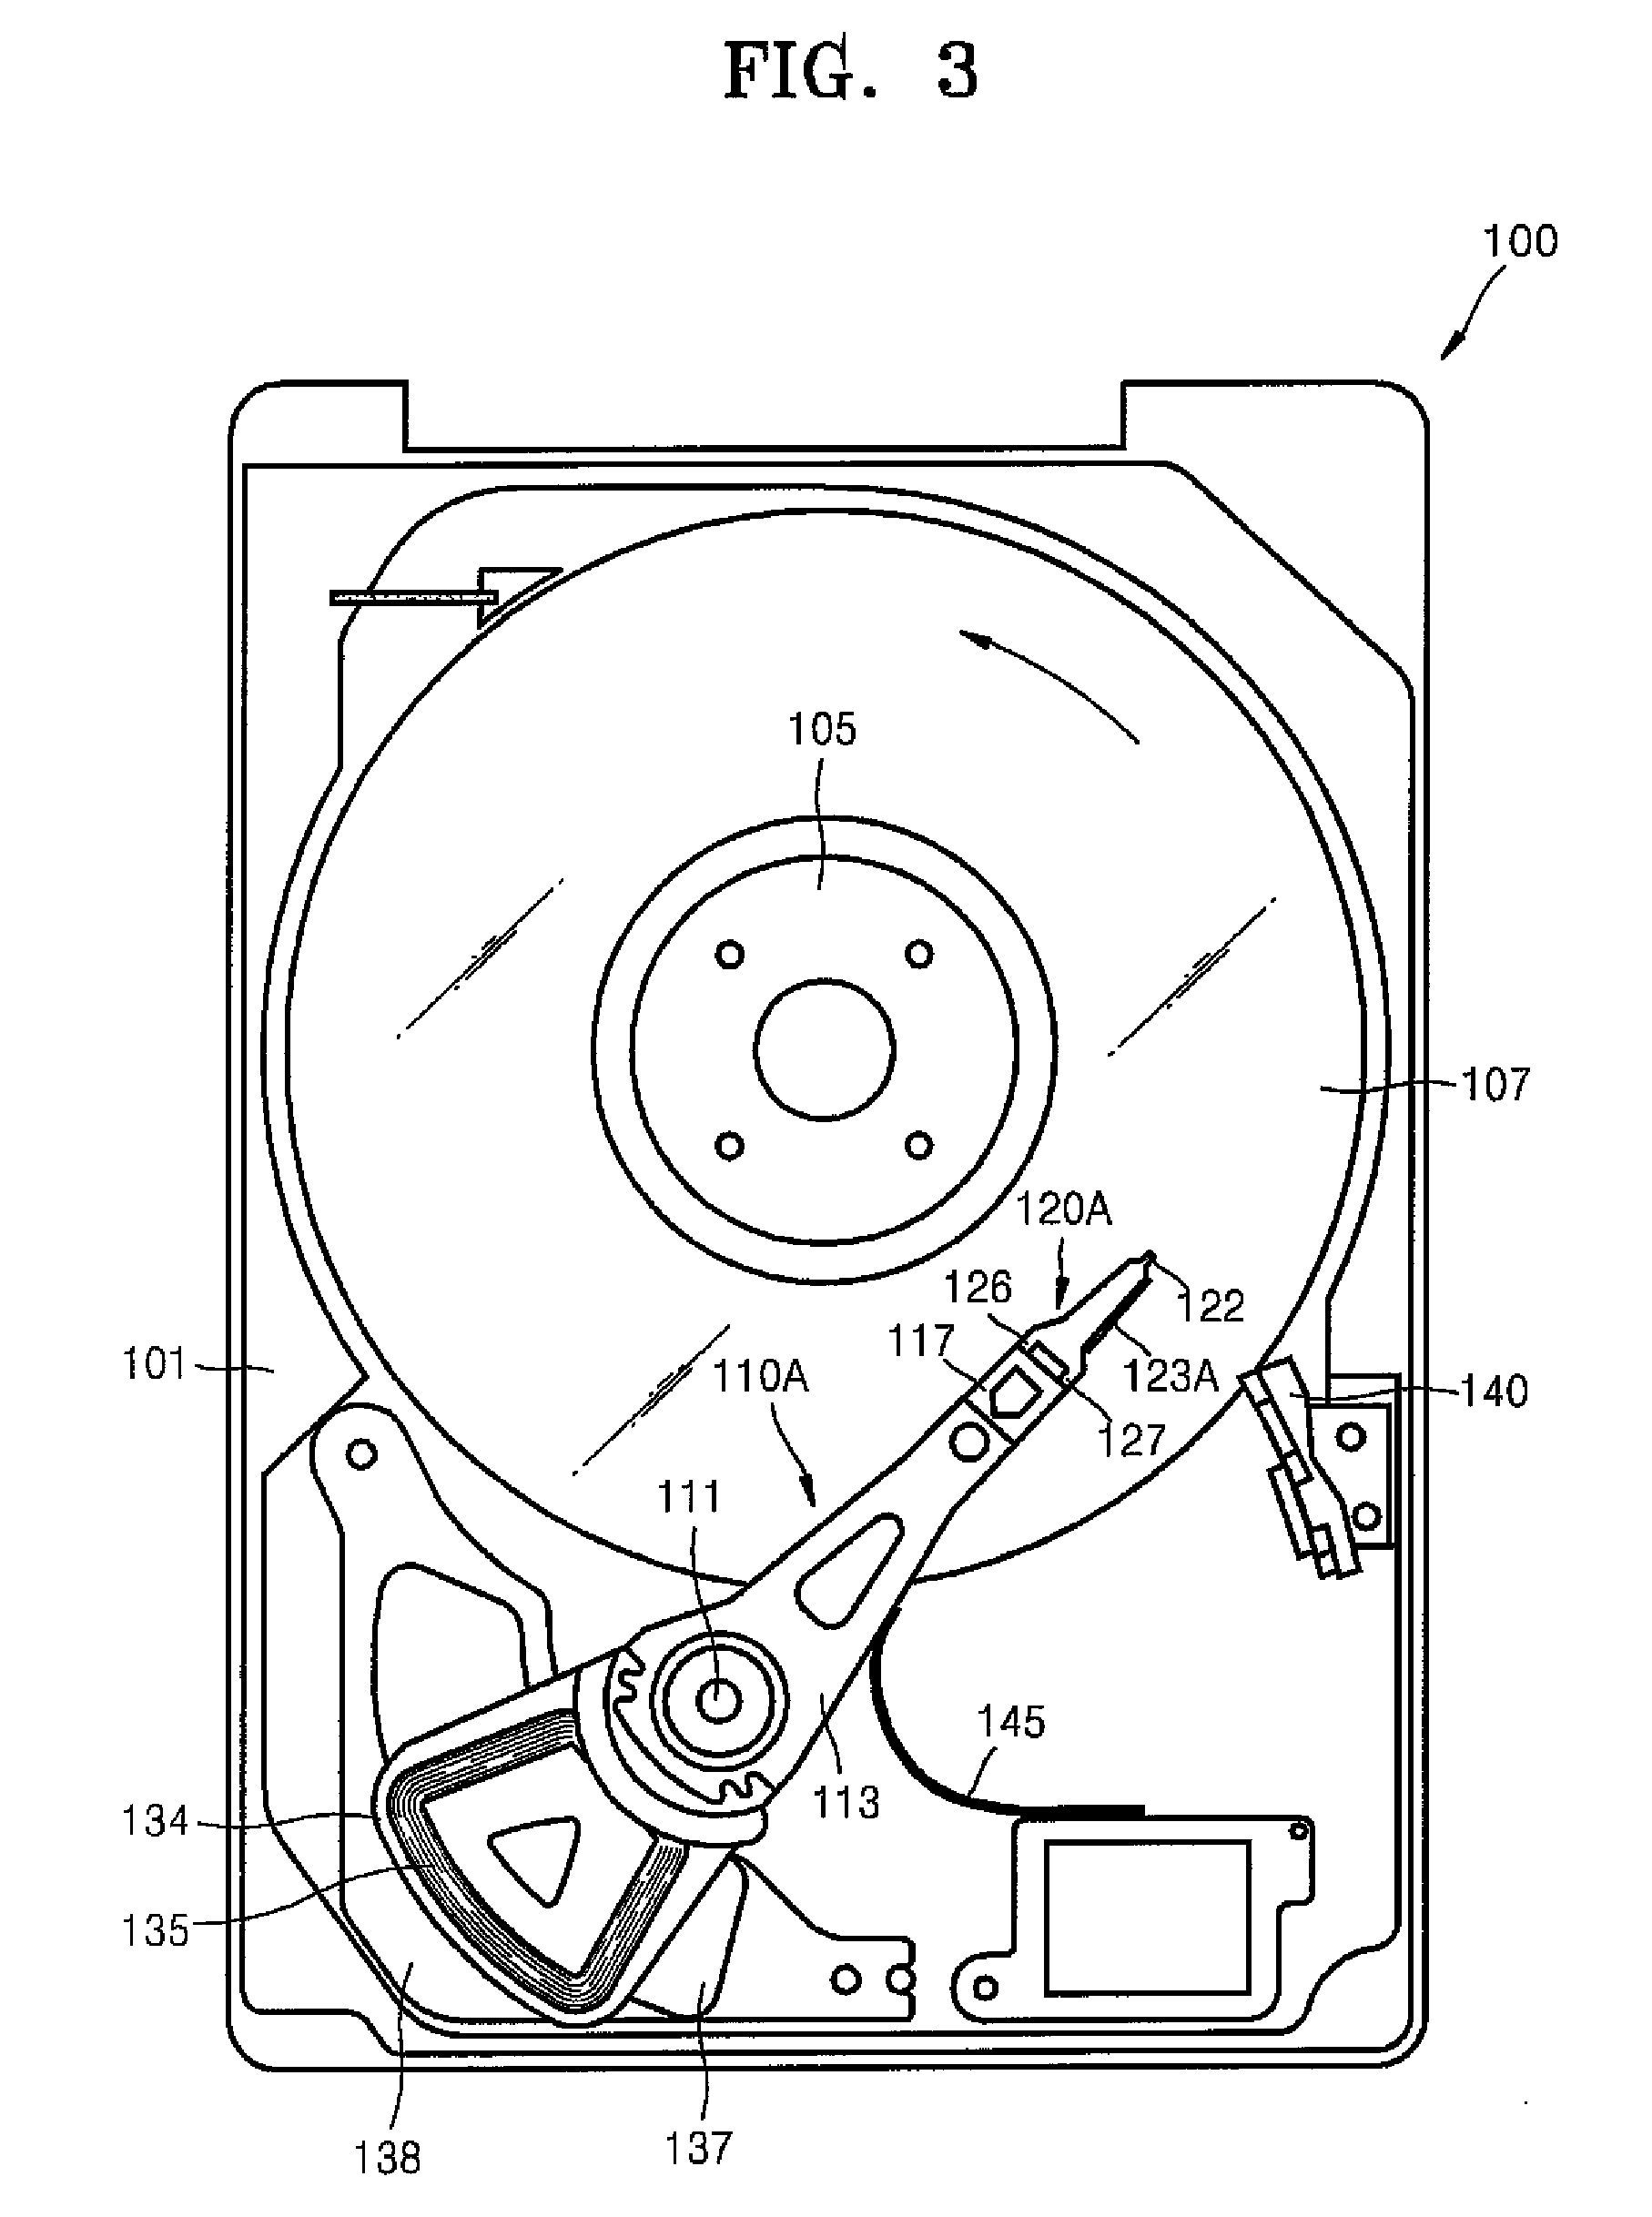 Head stack assembly with suspension supporting head slider and hard disc drive including the same